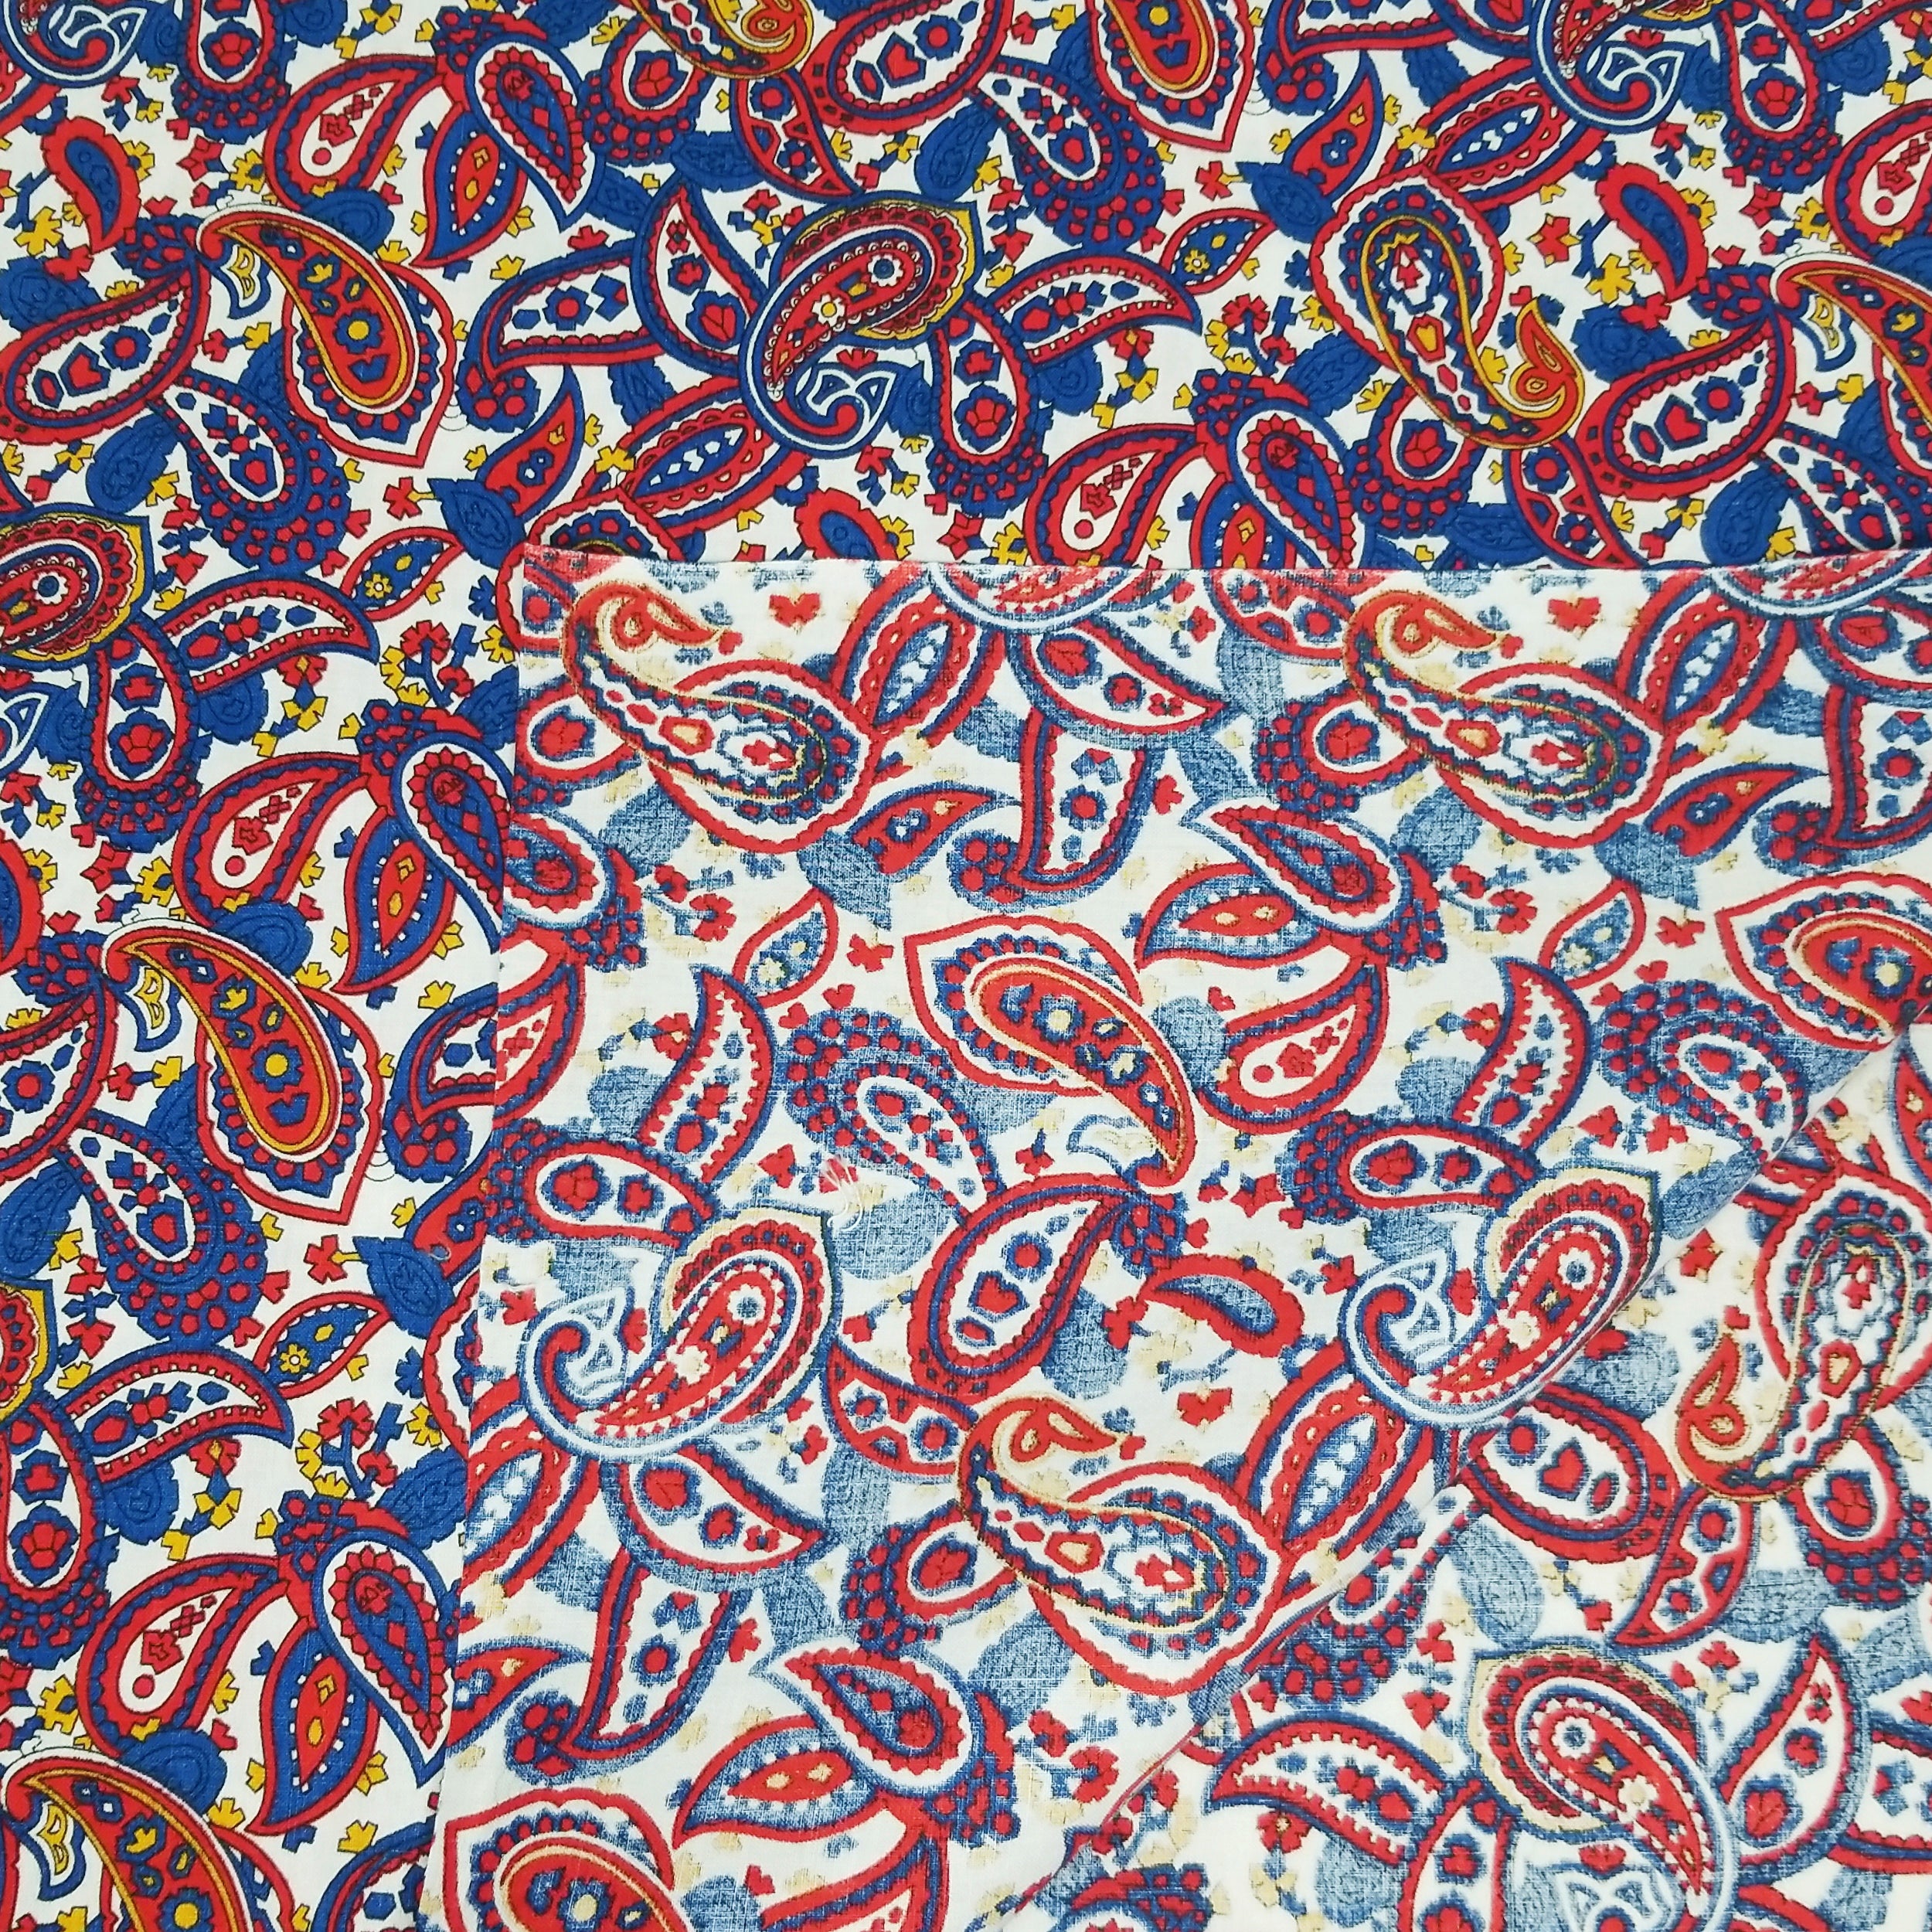 VINTAGE FABRIC BABY BOLT HALF-YARD -  SIXTIES' CLASSIC PAISLEY IN RED, WHITE, BLUE & YELLOW